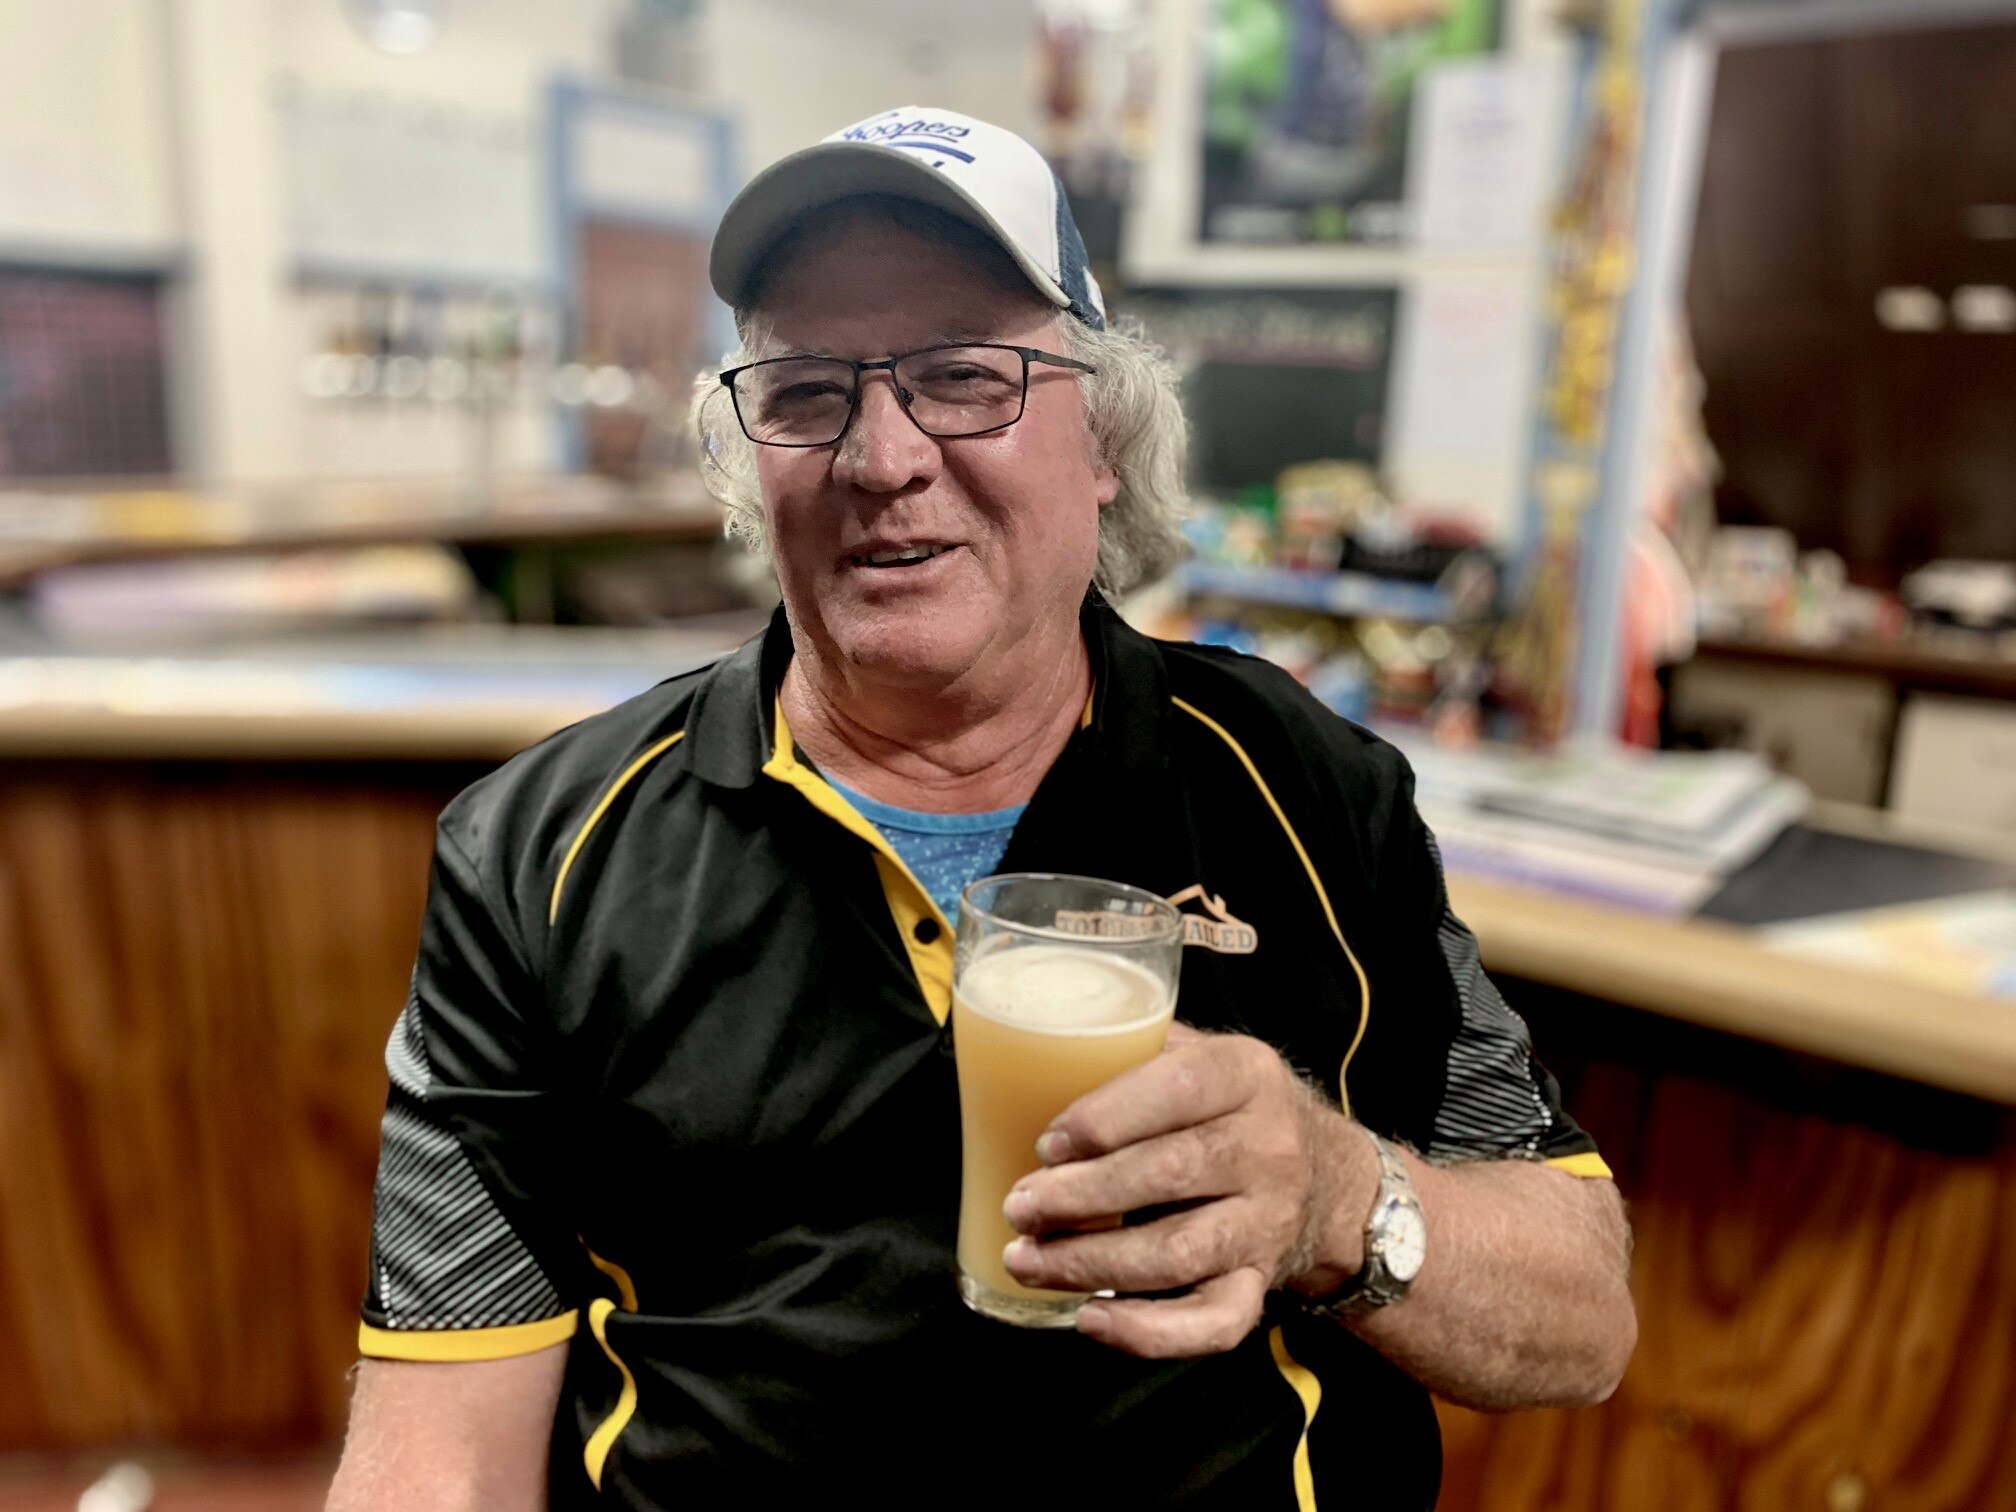 A man wearing a cap holding a beer.